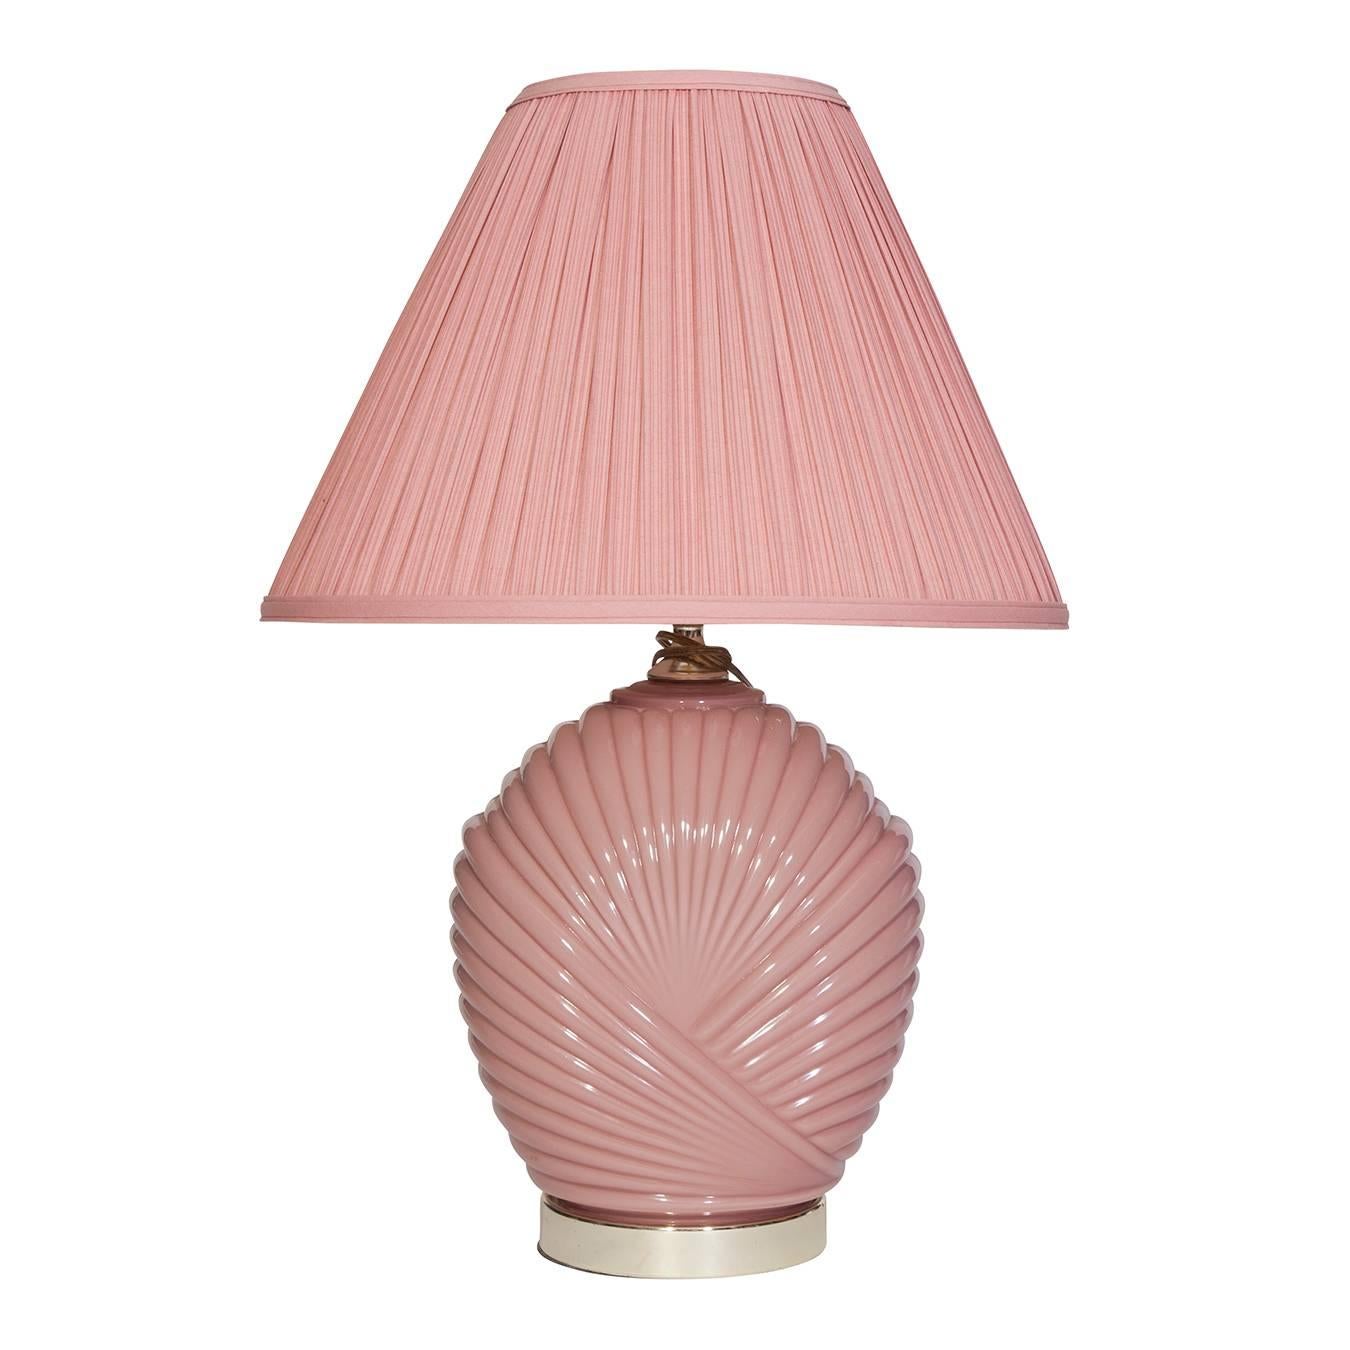 1950s Pink-on-pink Ceramic Table Lamp